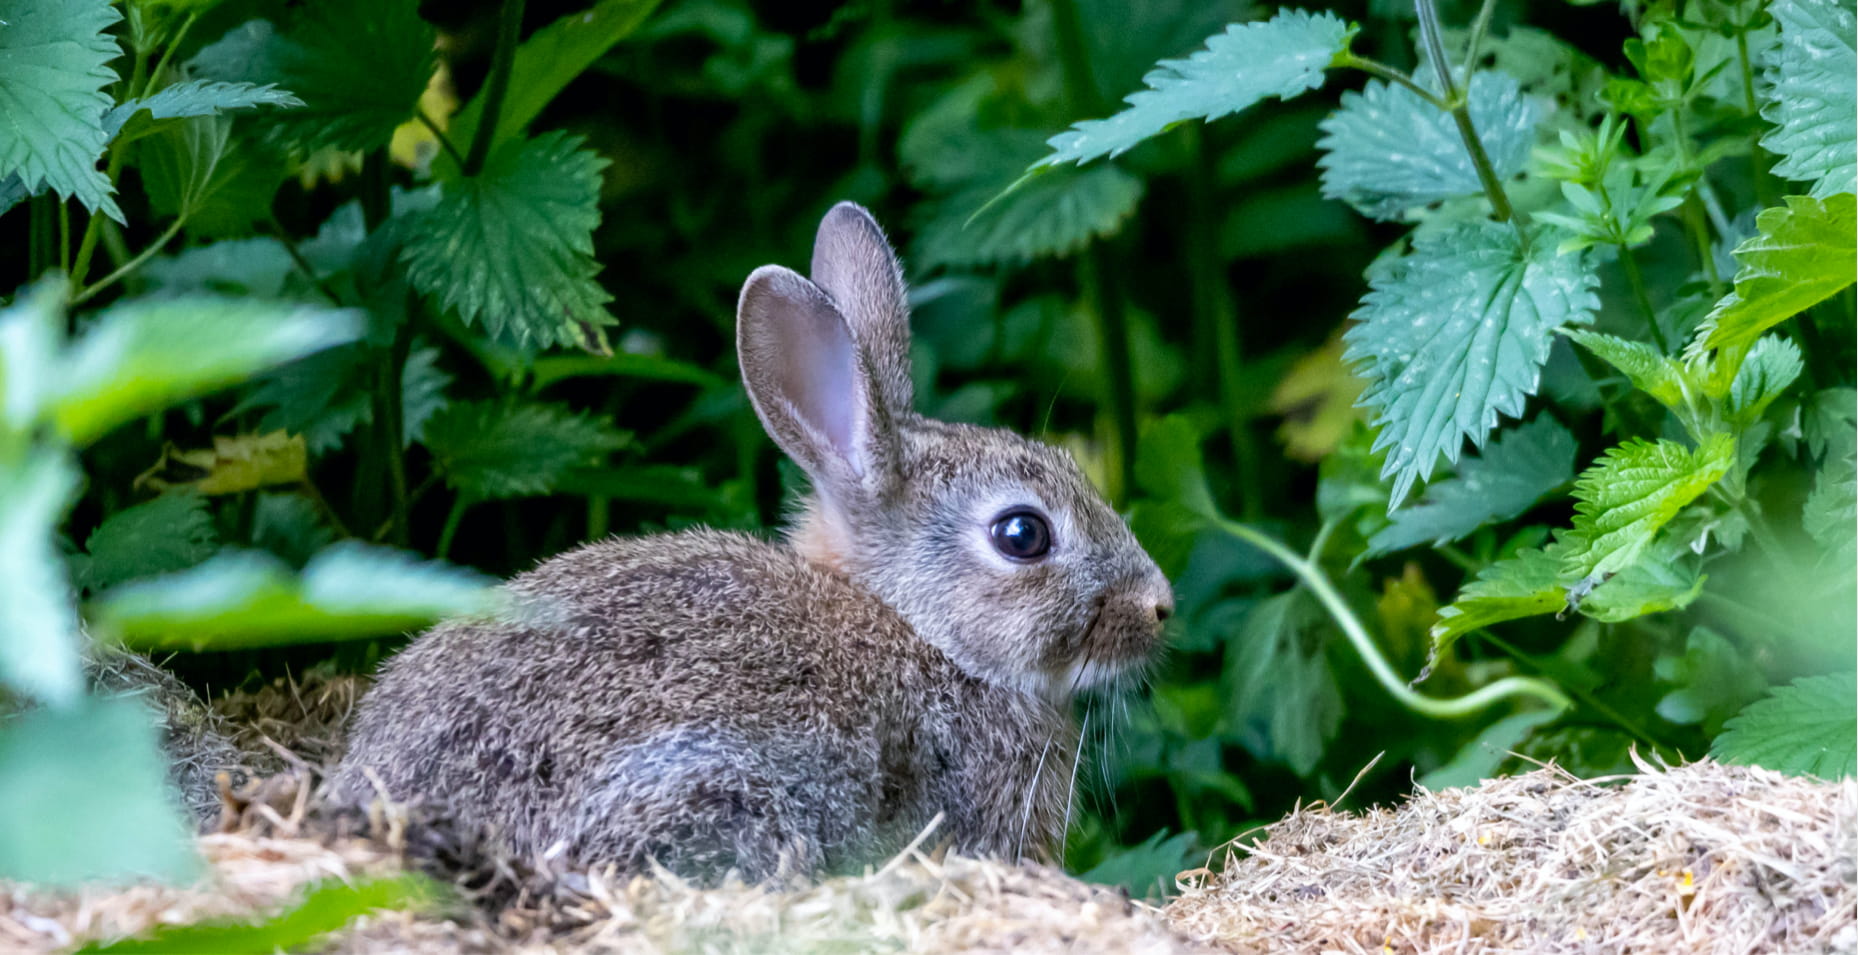 Image lapin test sur les animaux cruelty free